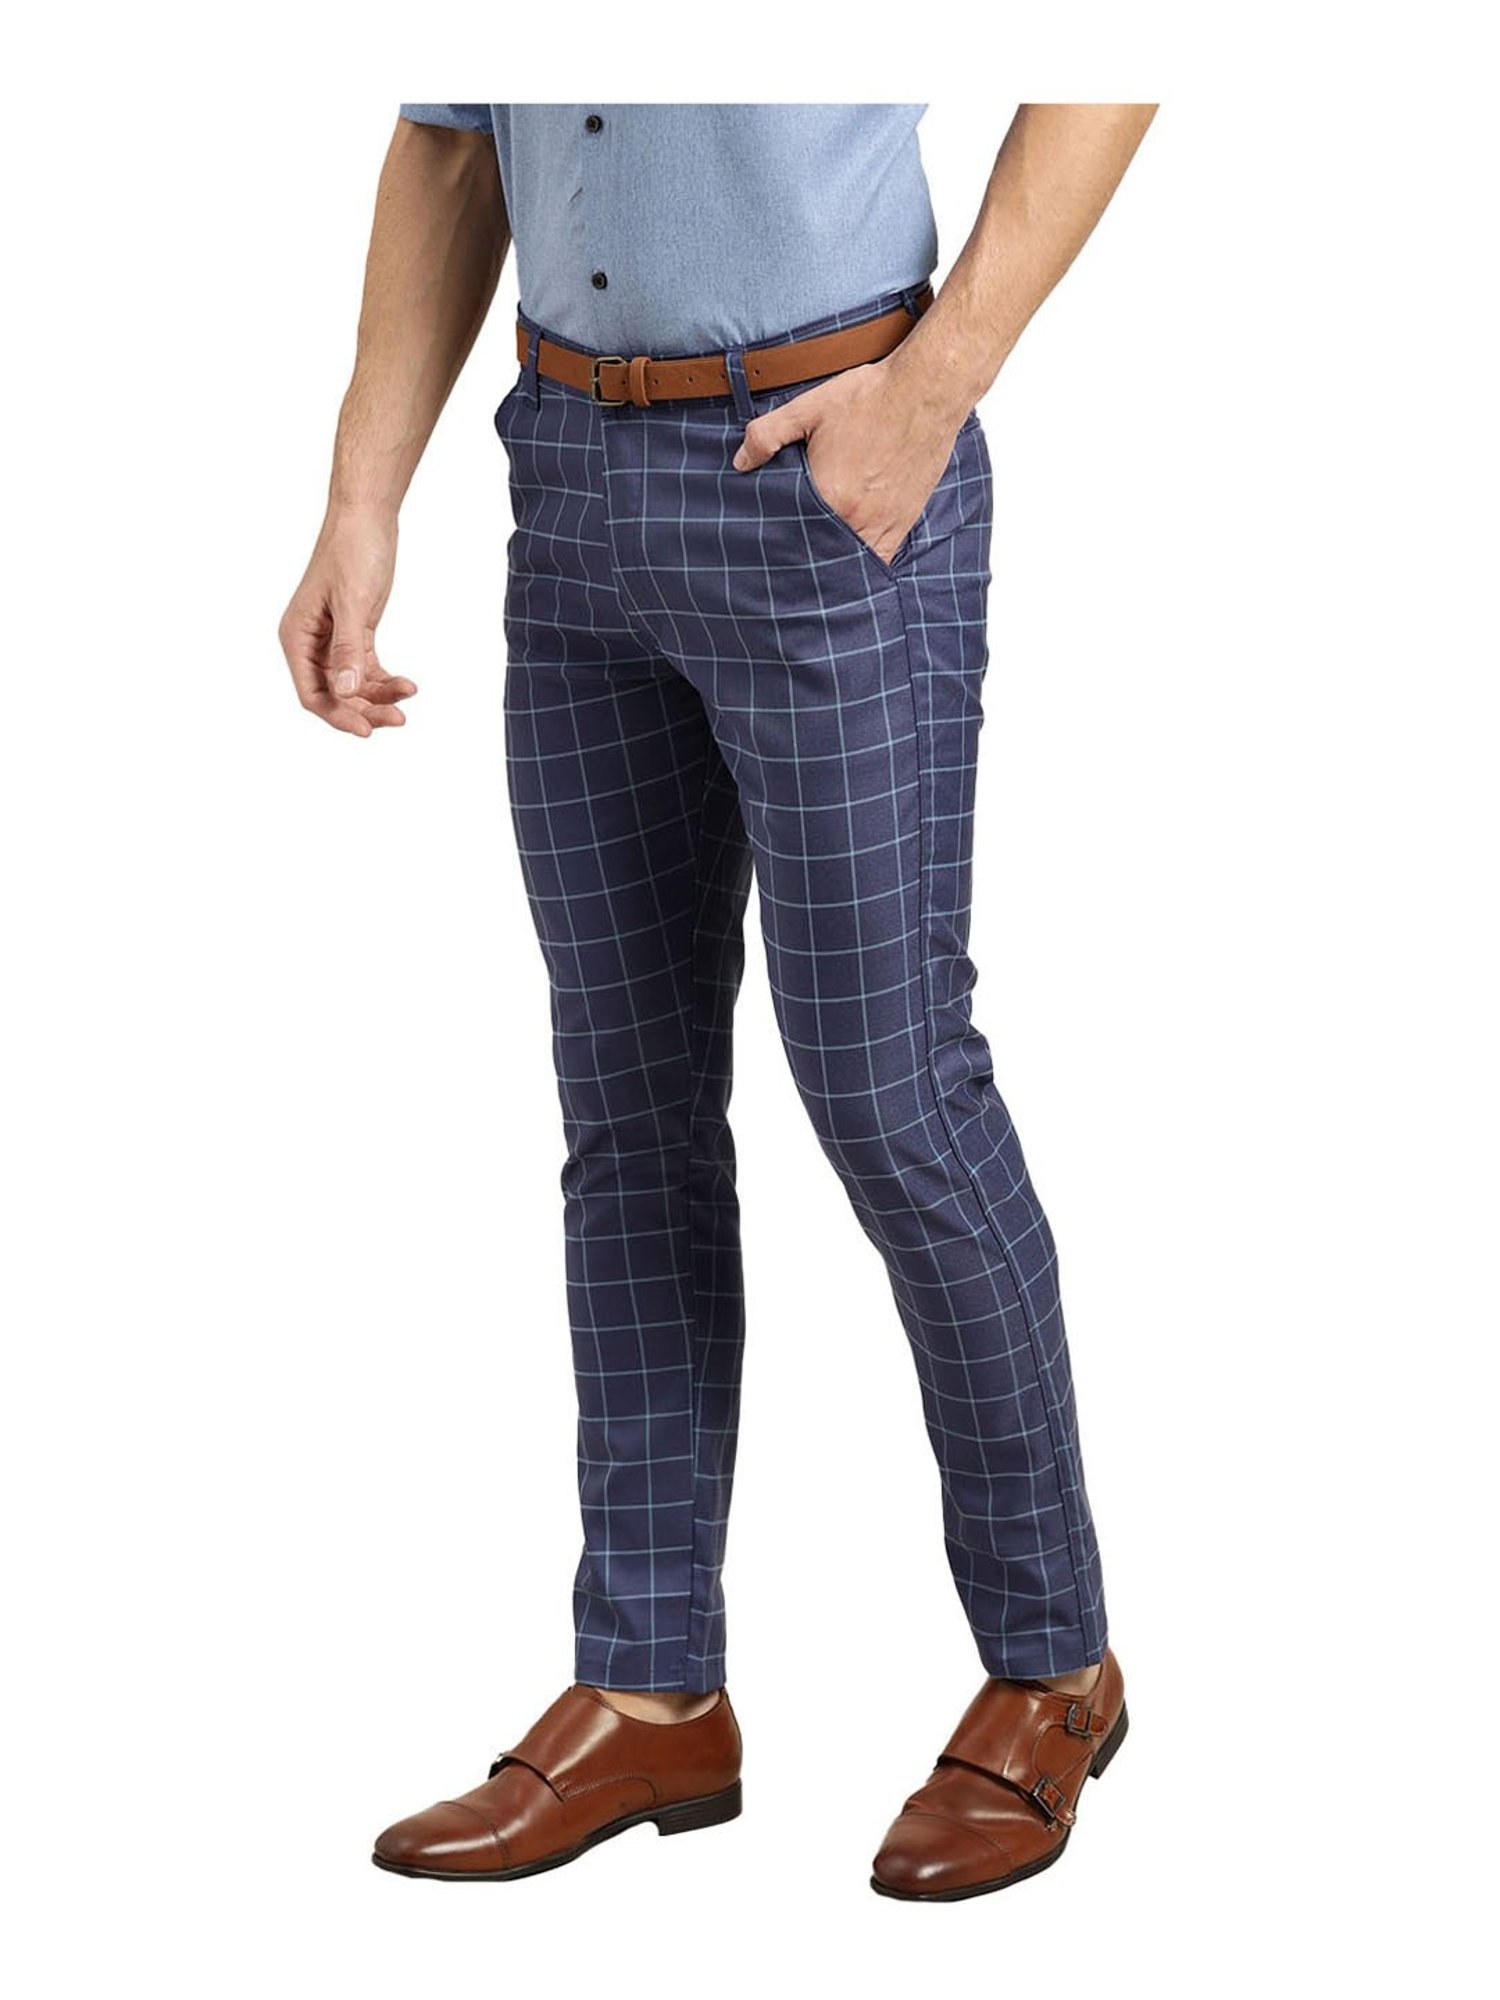 Men's Cotton Blend Navy Blue & Off White Checked Formal Trousers - Sojanya  | Checked trousers, White collared shirt, Business casual men